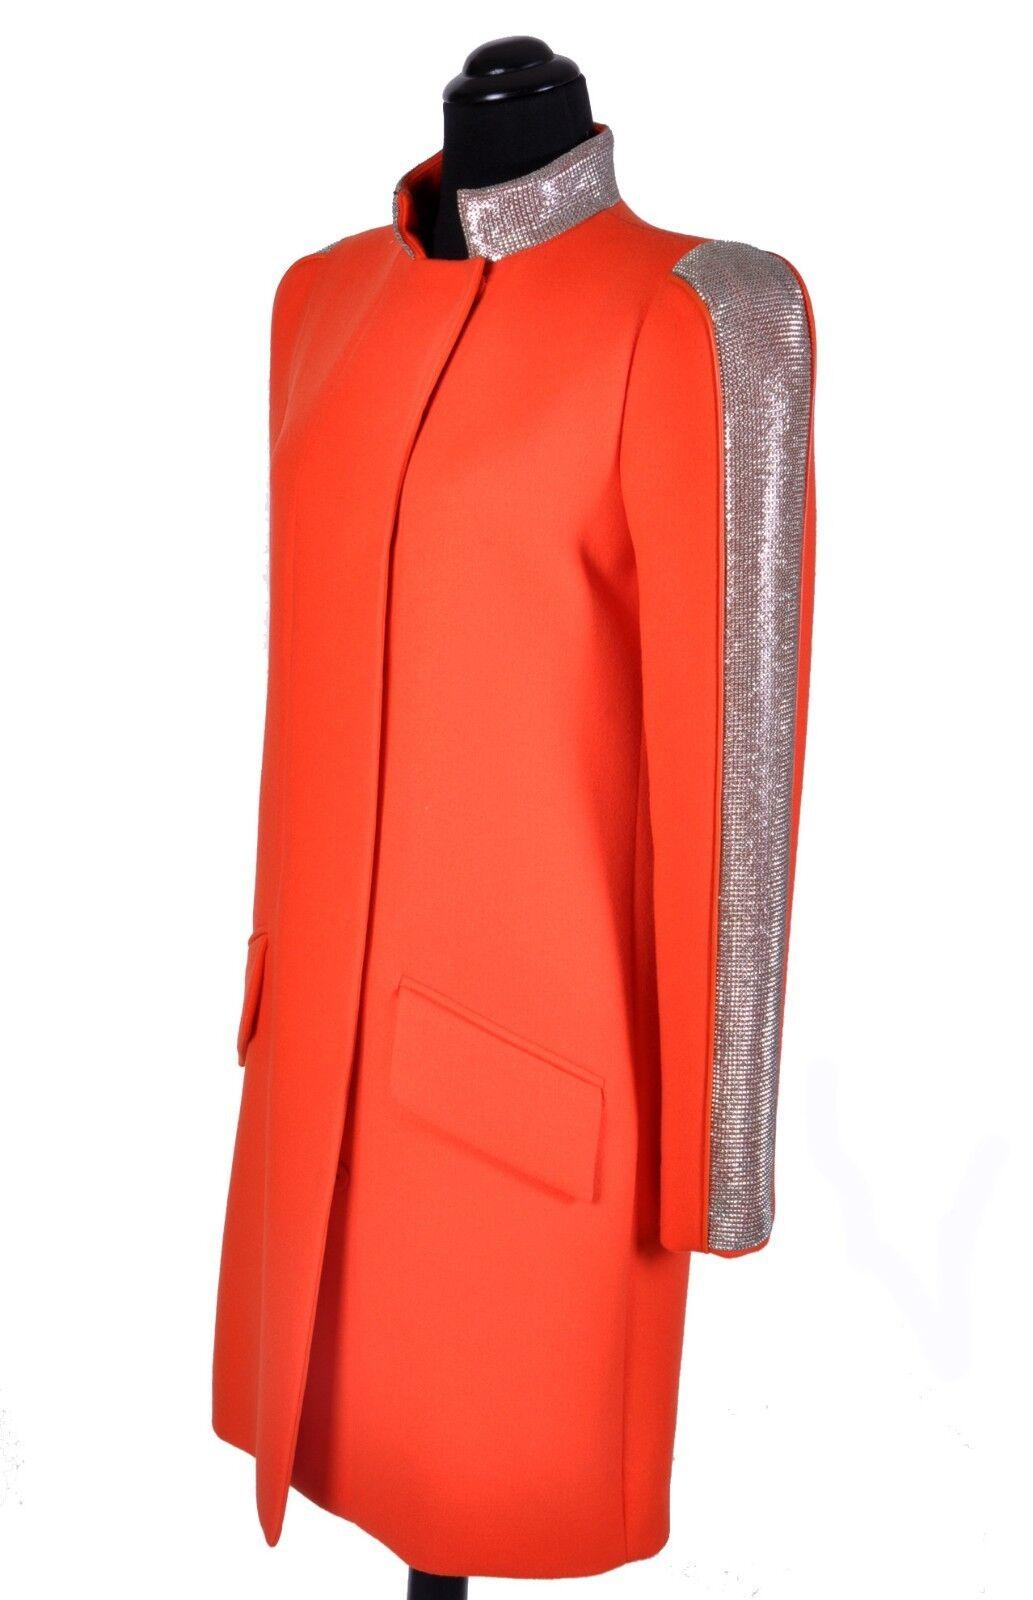 NEW VERSACE ORANGE WOOL and CHAIN MESH COAT 40 - 4 For Sale 1